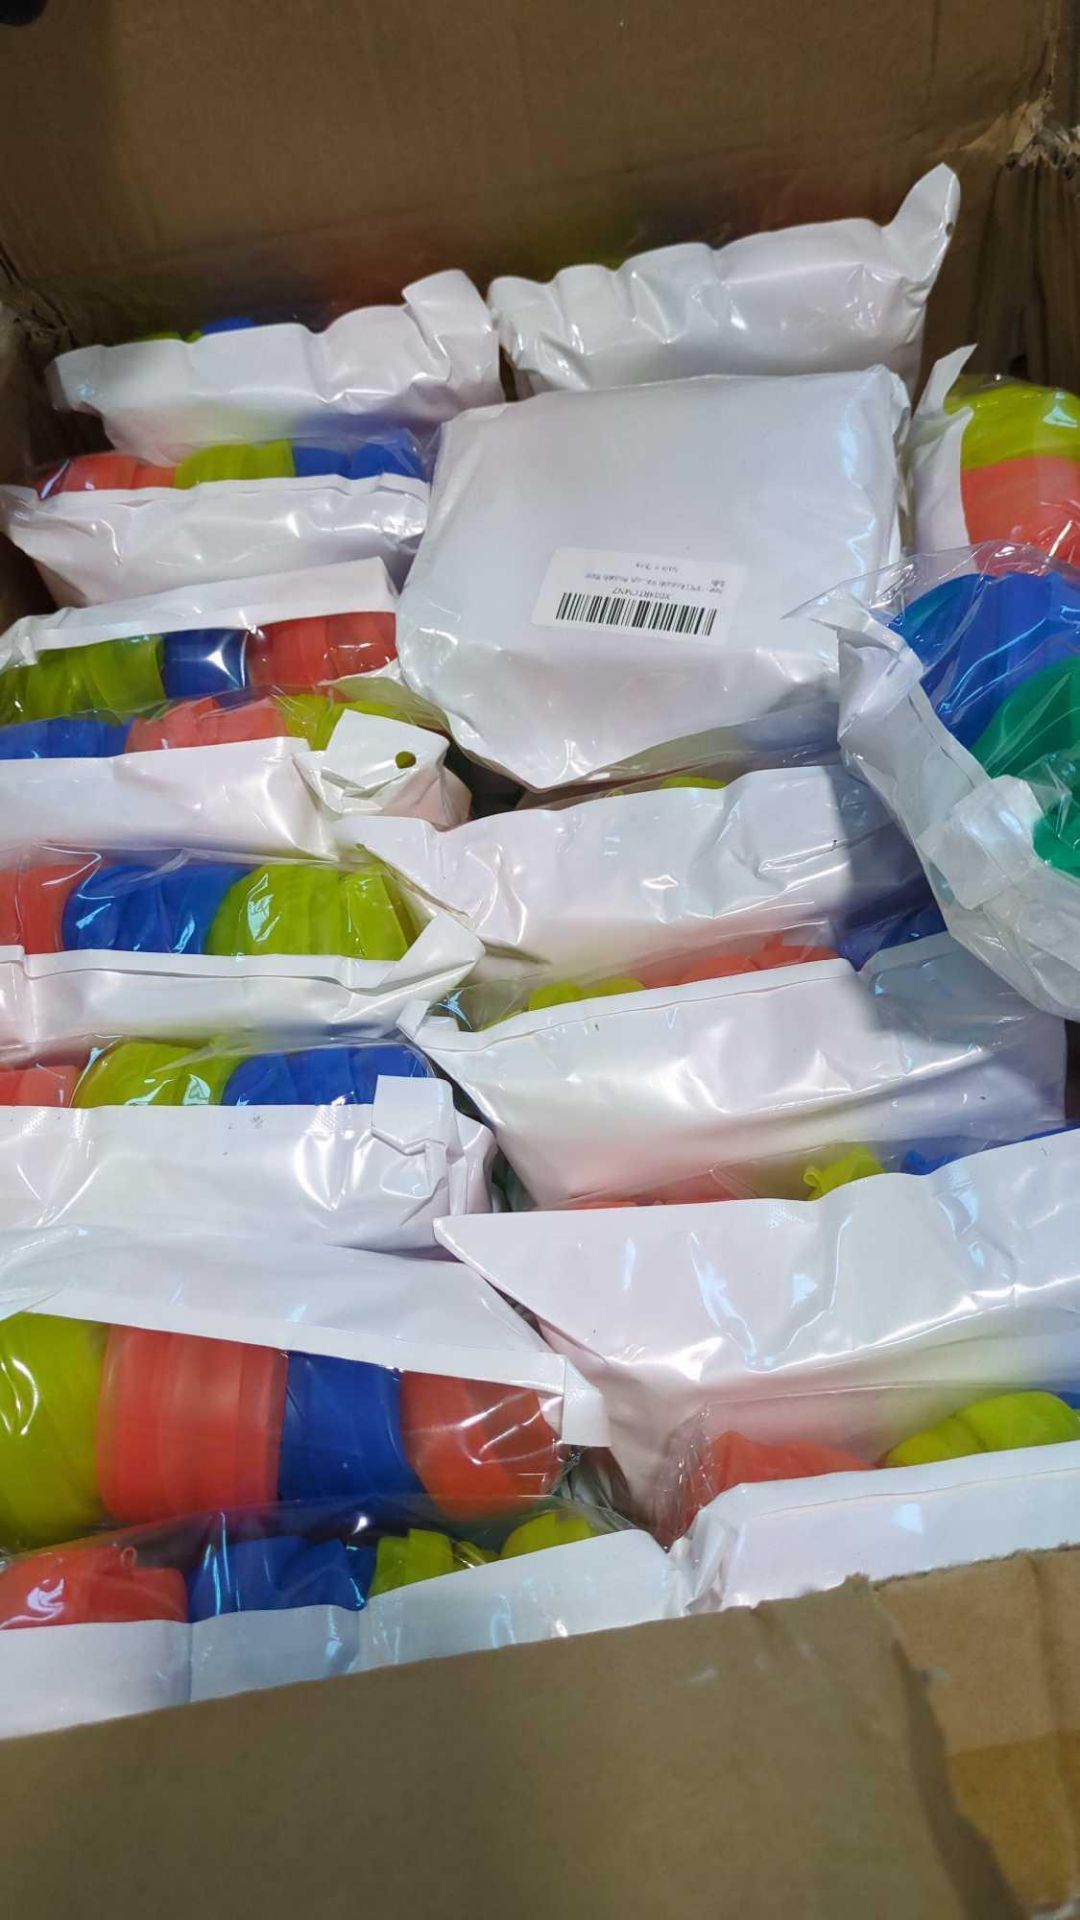 Pallet- reusable water ballons, eye mask set, hose, car parts, and more - Image 3 of 15